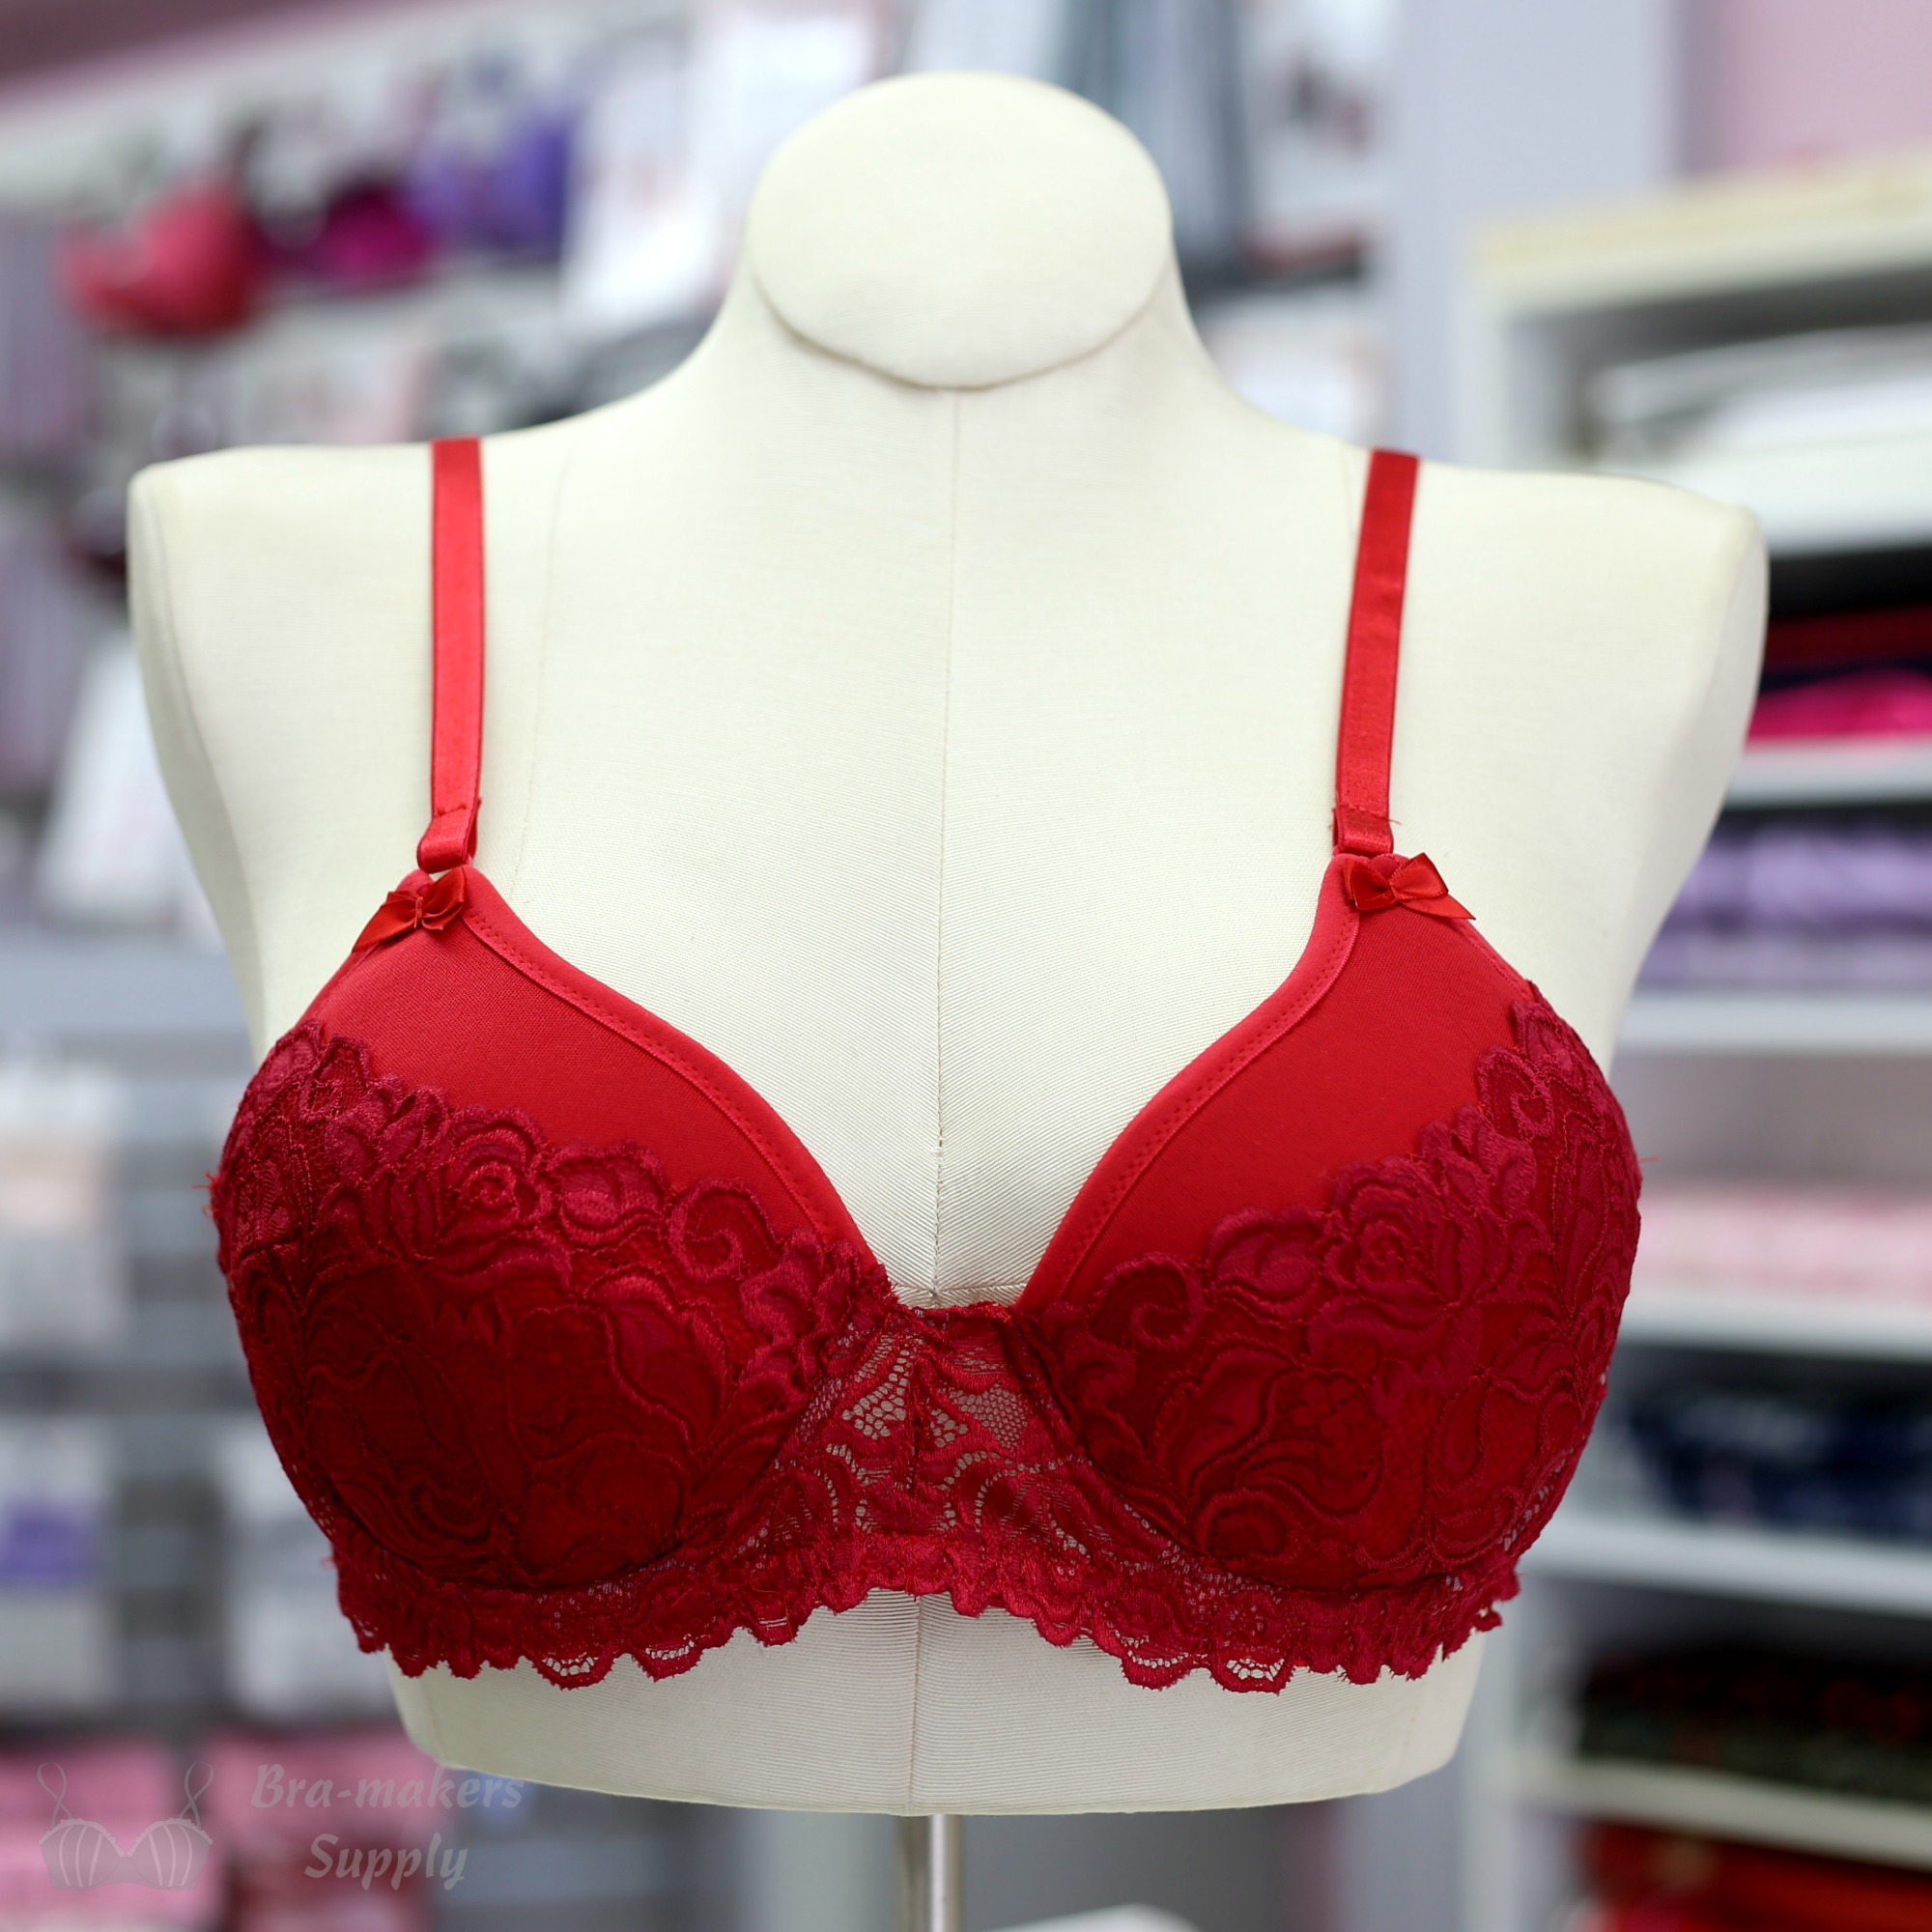 Factory Made Bra SOLD at Ruby Lane